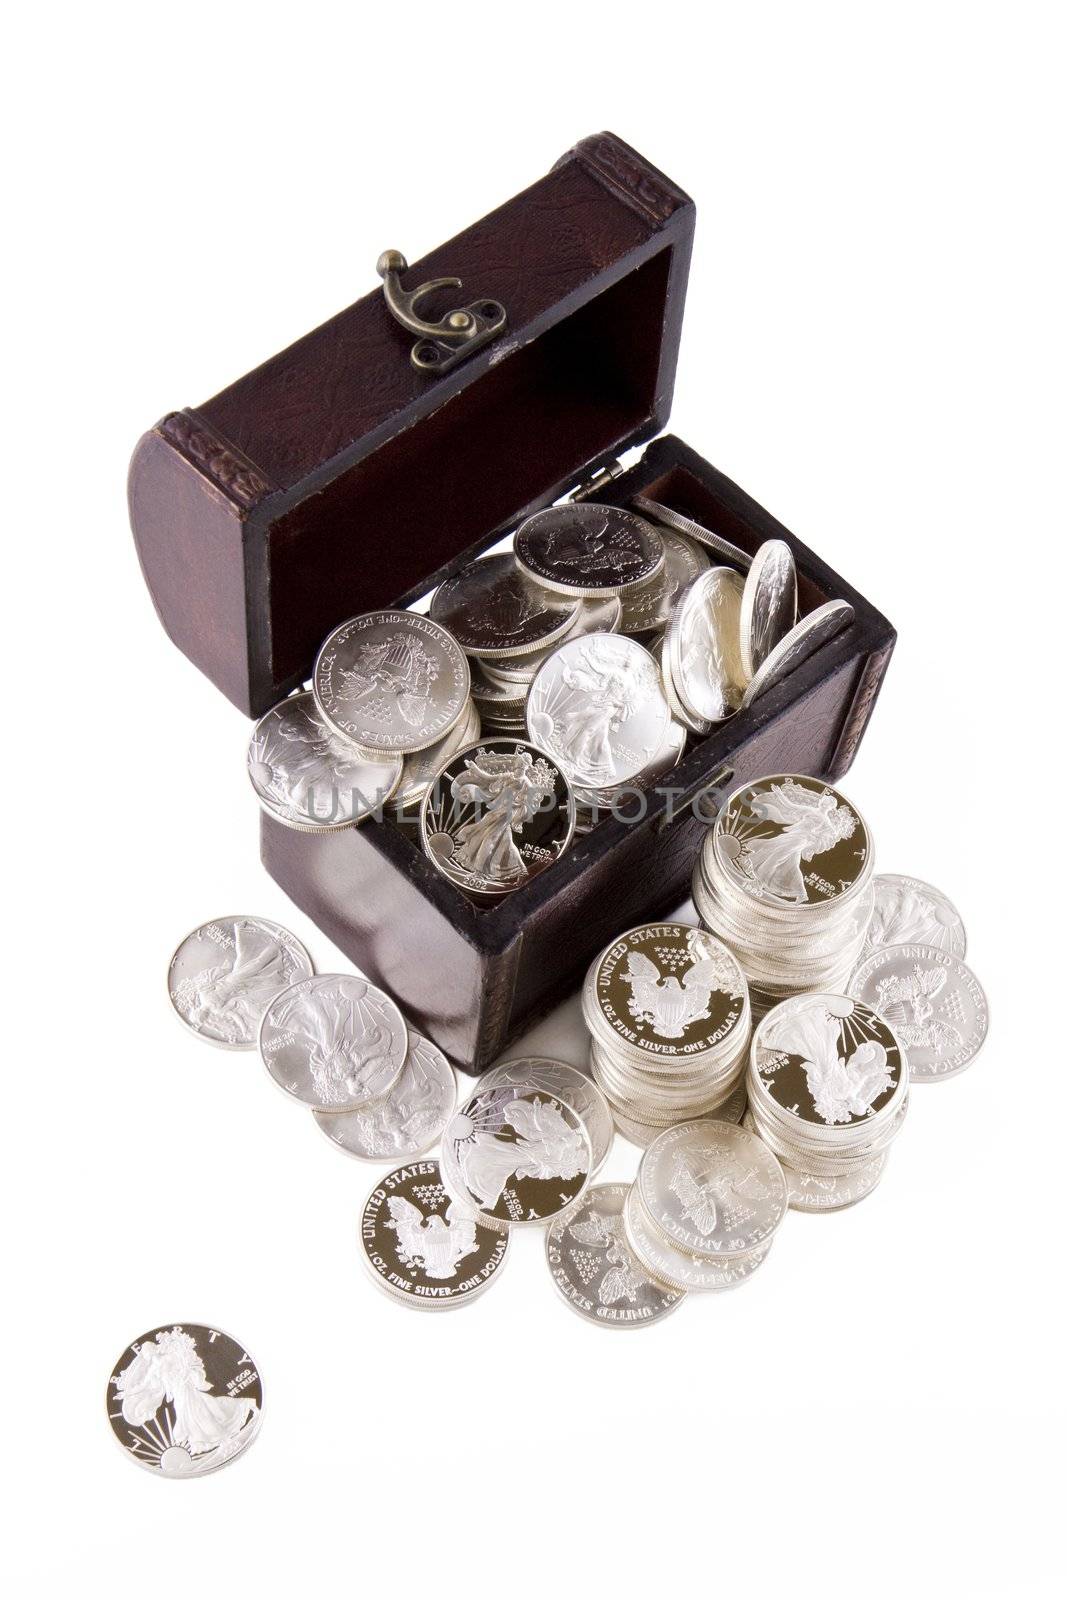 Old case full of silver coins, isolated on white background